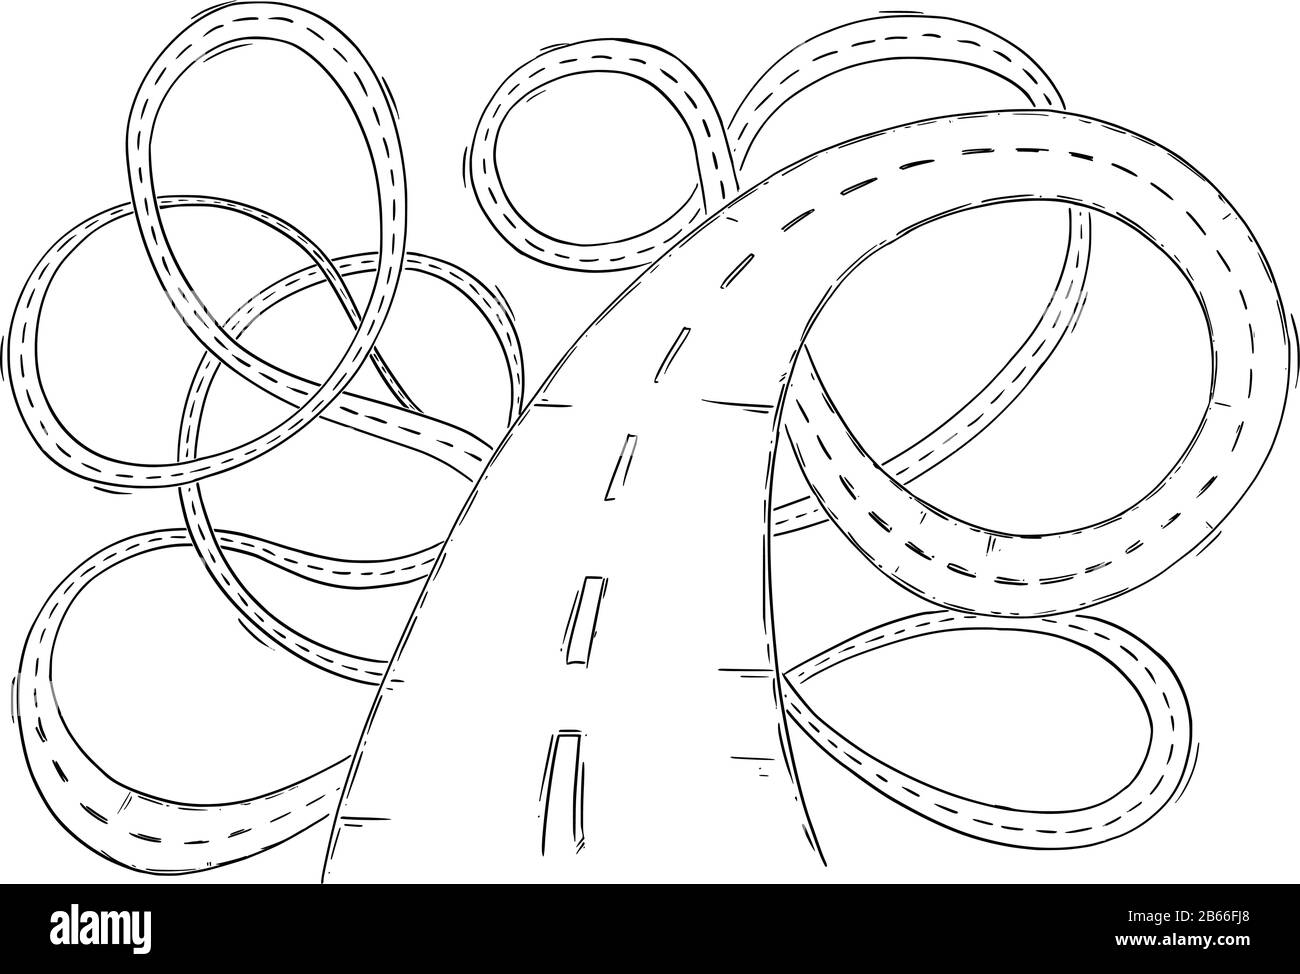 Vector black and white conceptual business drawing or illustration of chaos road, problem or obstacle in way, uncertain direction and difficult choices. Stock Vector